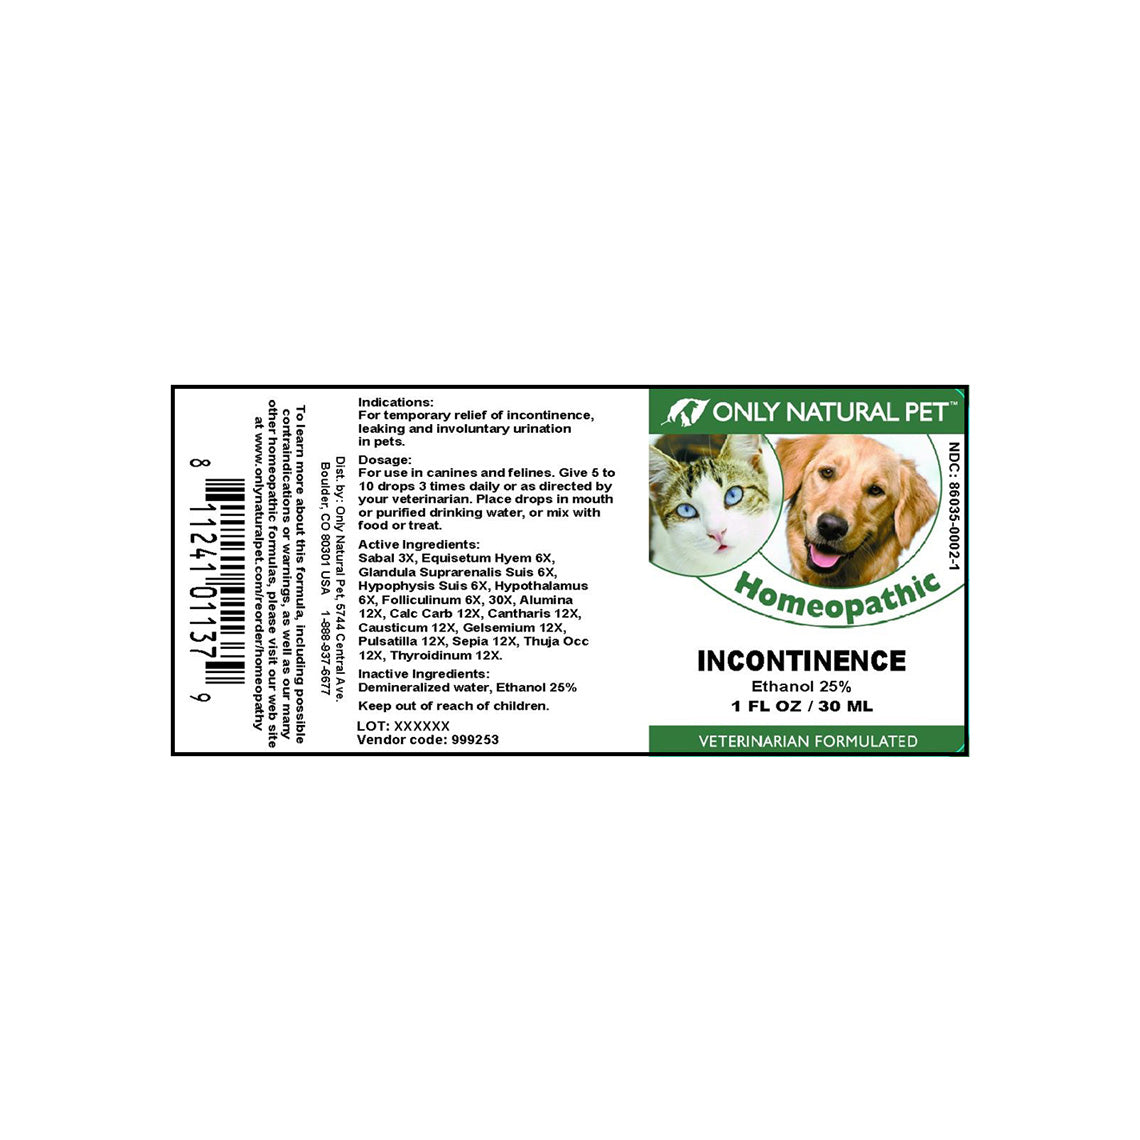 Only Natural Pet Incontinence Homeopathic Remedy